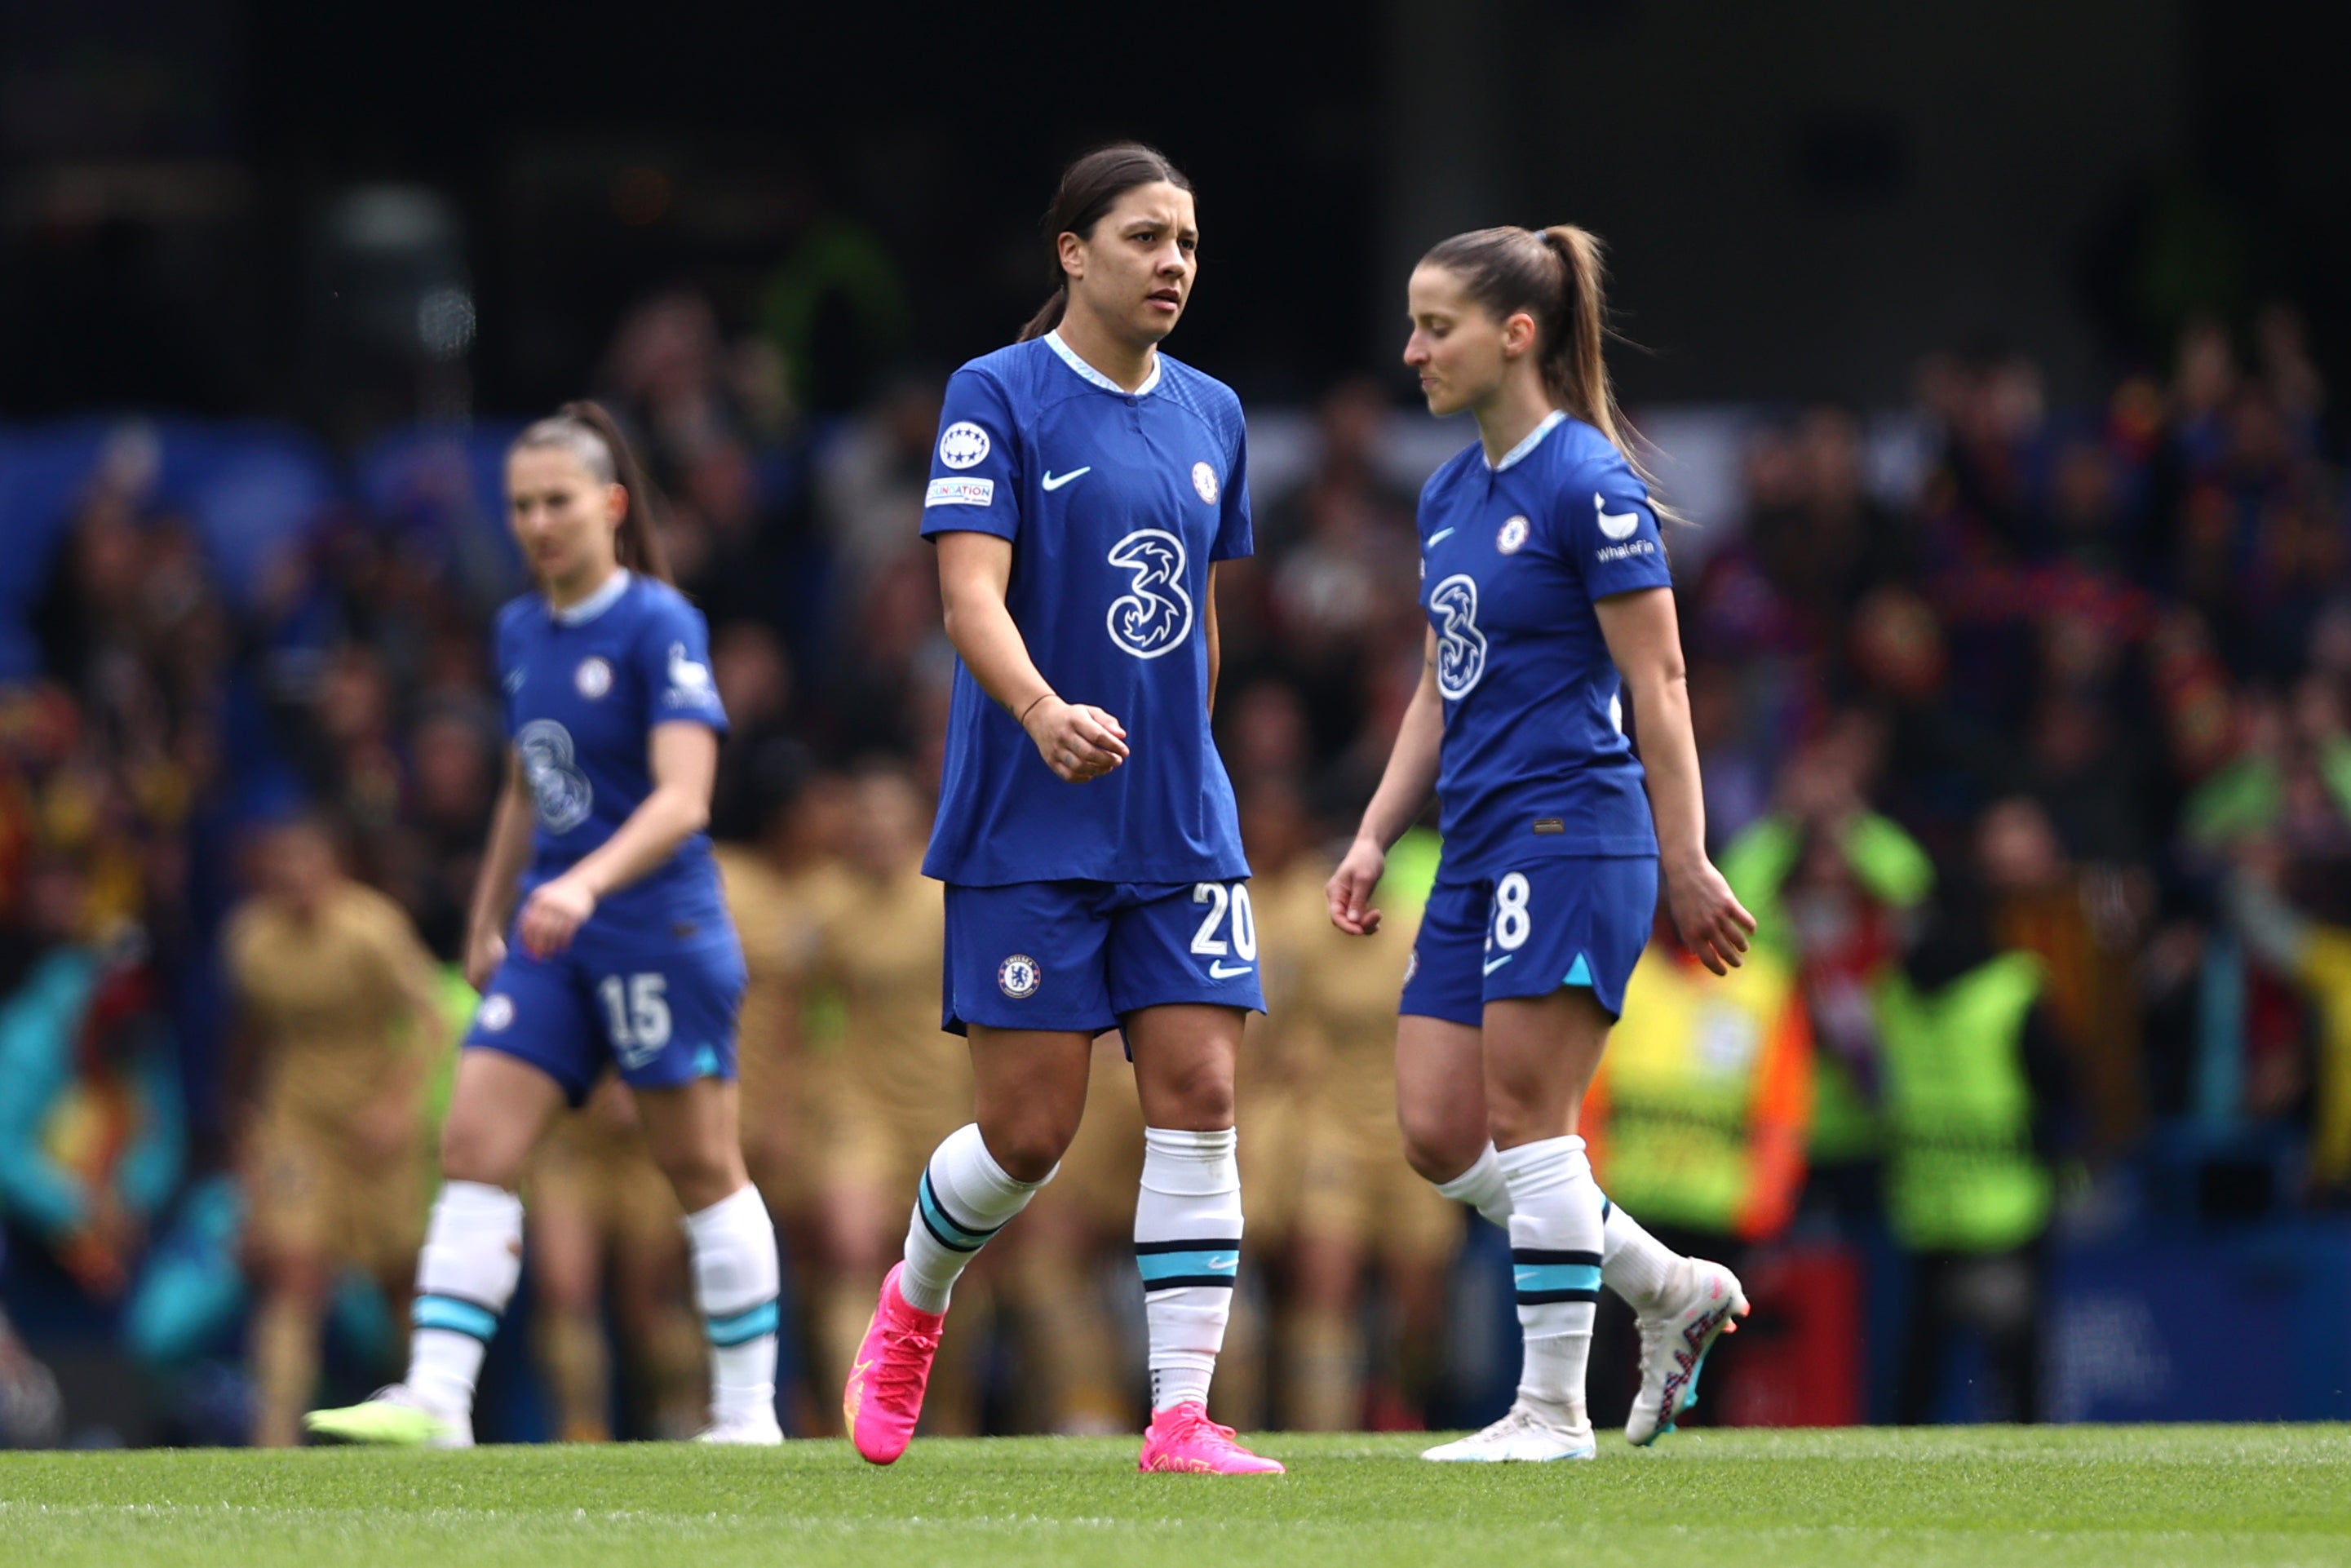 Chelsea and Sam Kerr had few chances to equalise in the second half at Stamford Bridge